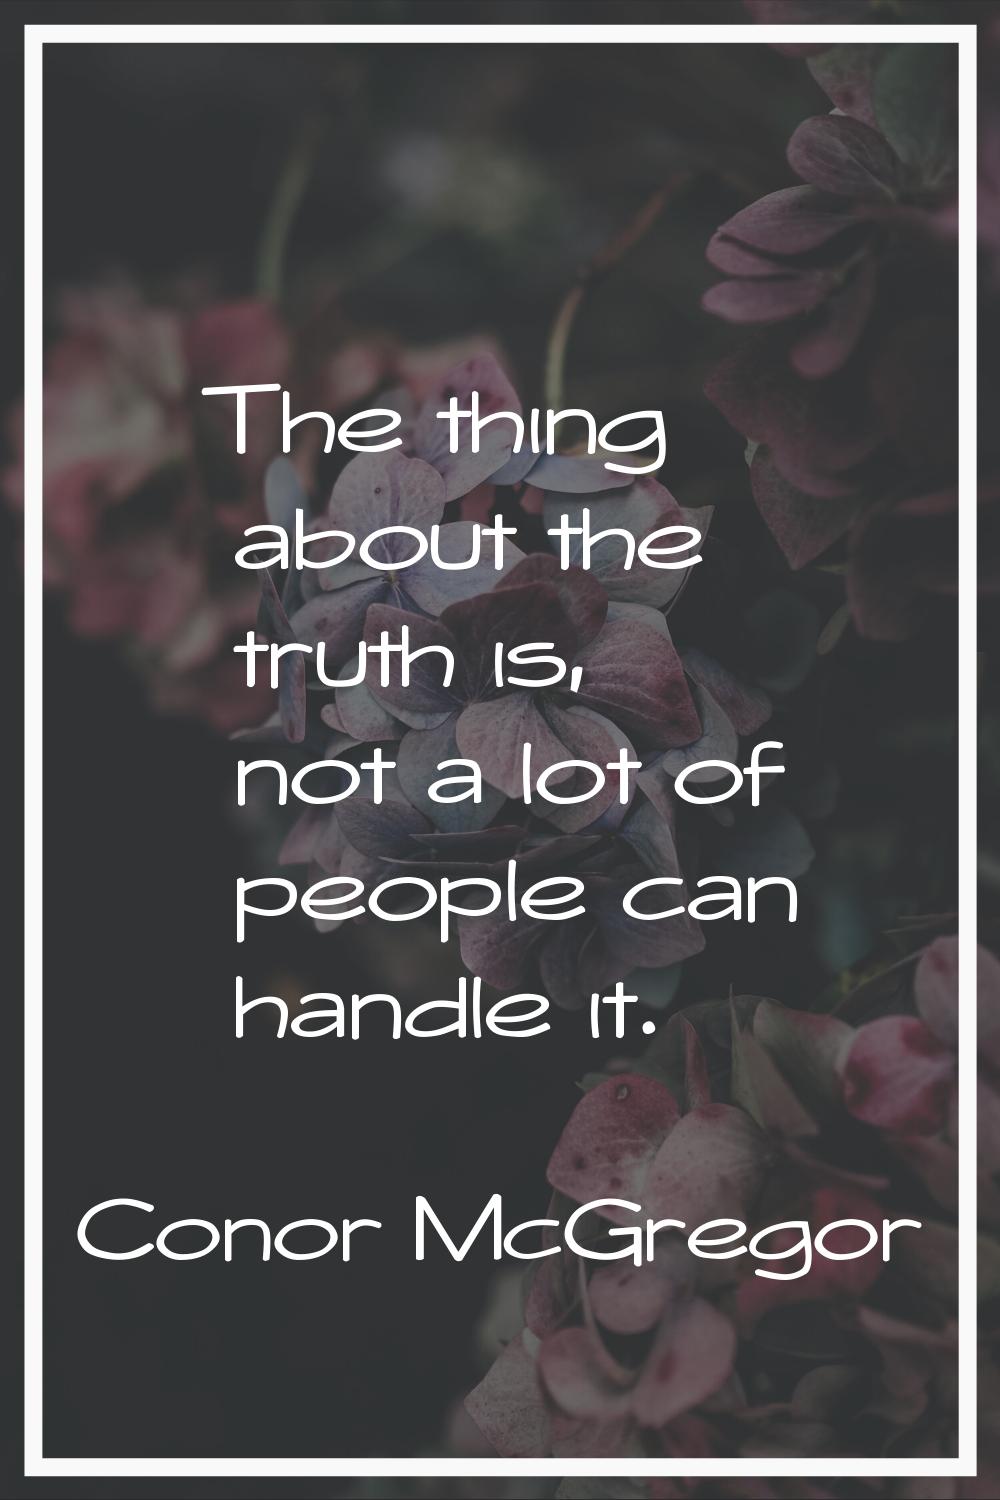 The thing about the truth is, not a lot of people can handle it.